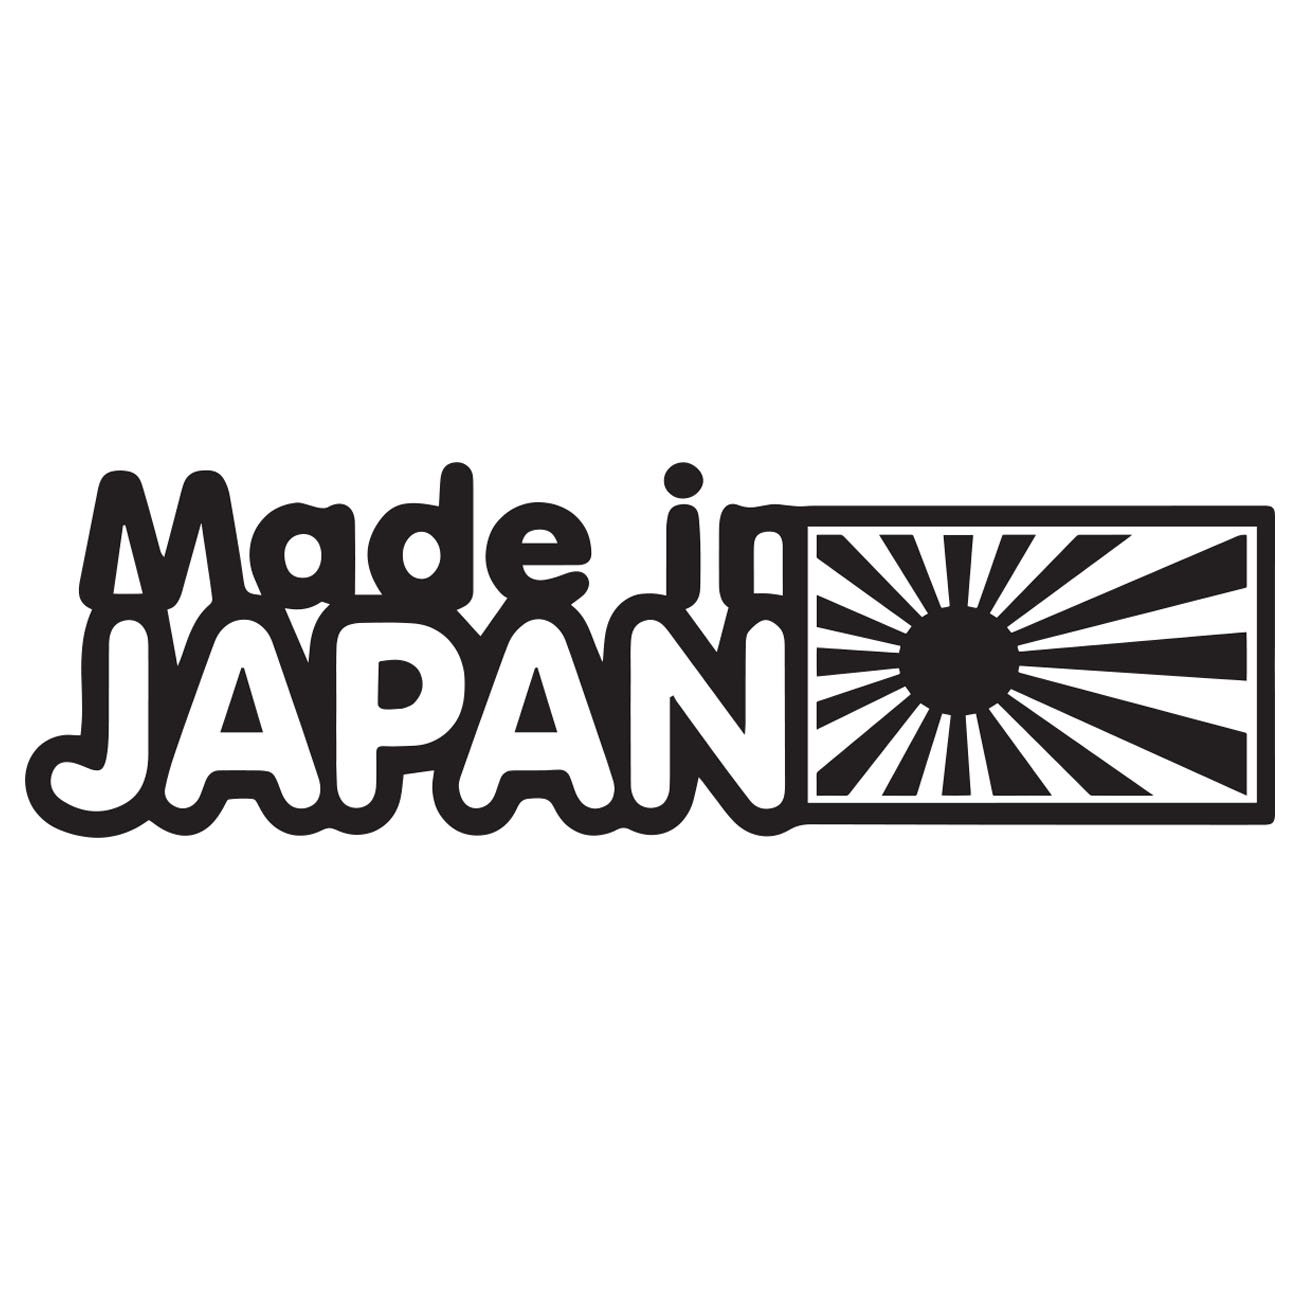 Made in japan 1